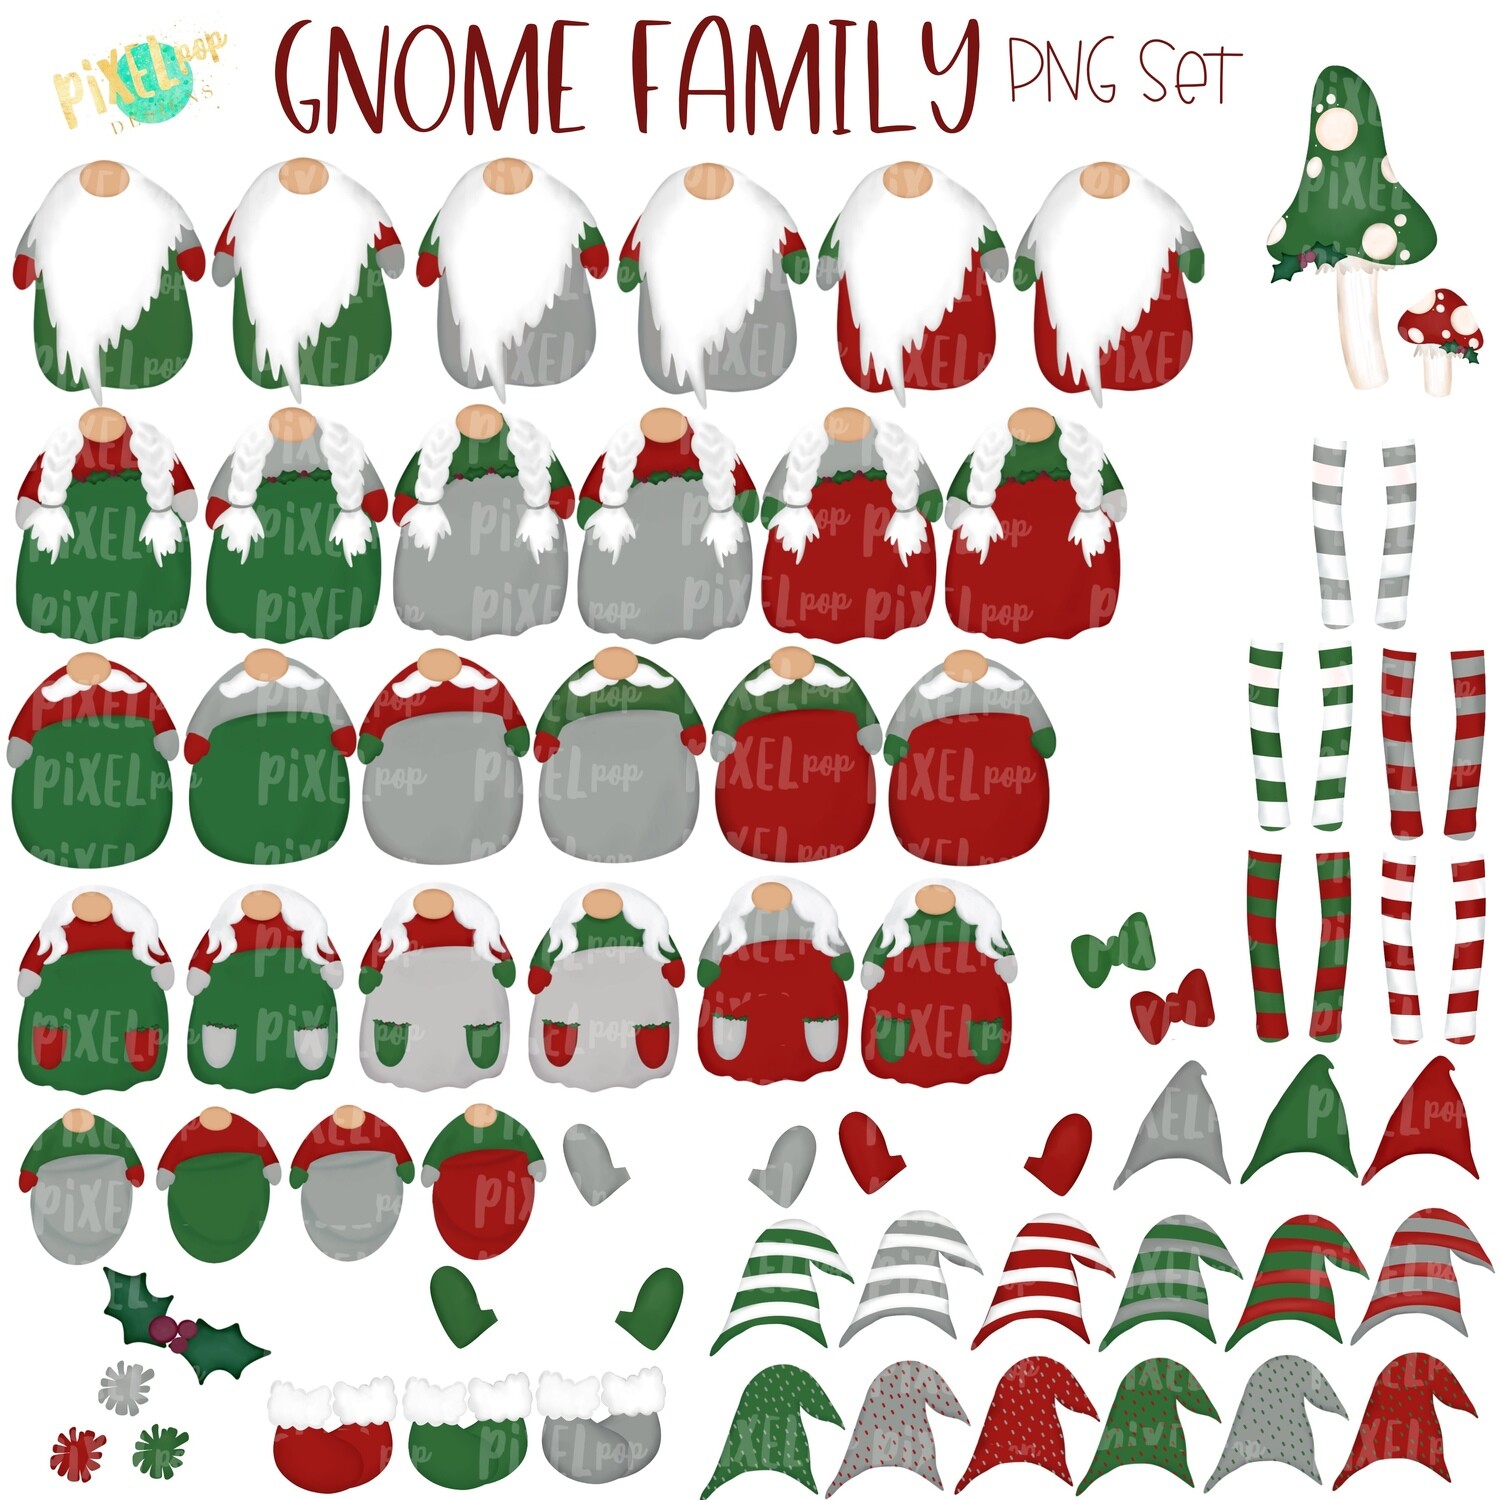 Gnome Family PNG Set with Accessories | Gnome Christmas Images | Ornament | Christmas PNG | Gnome Design | Sublimation Art |  | Printable